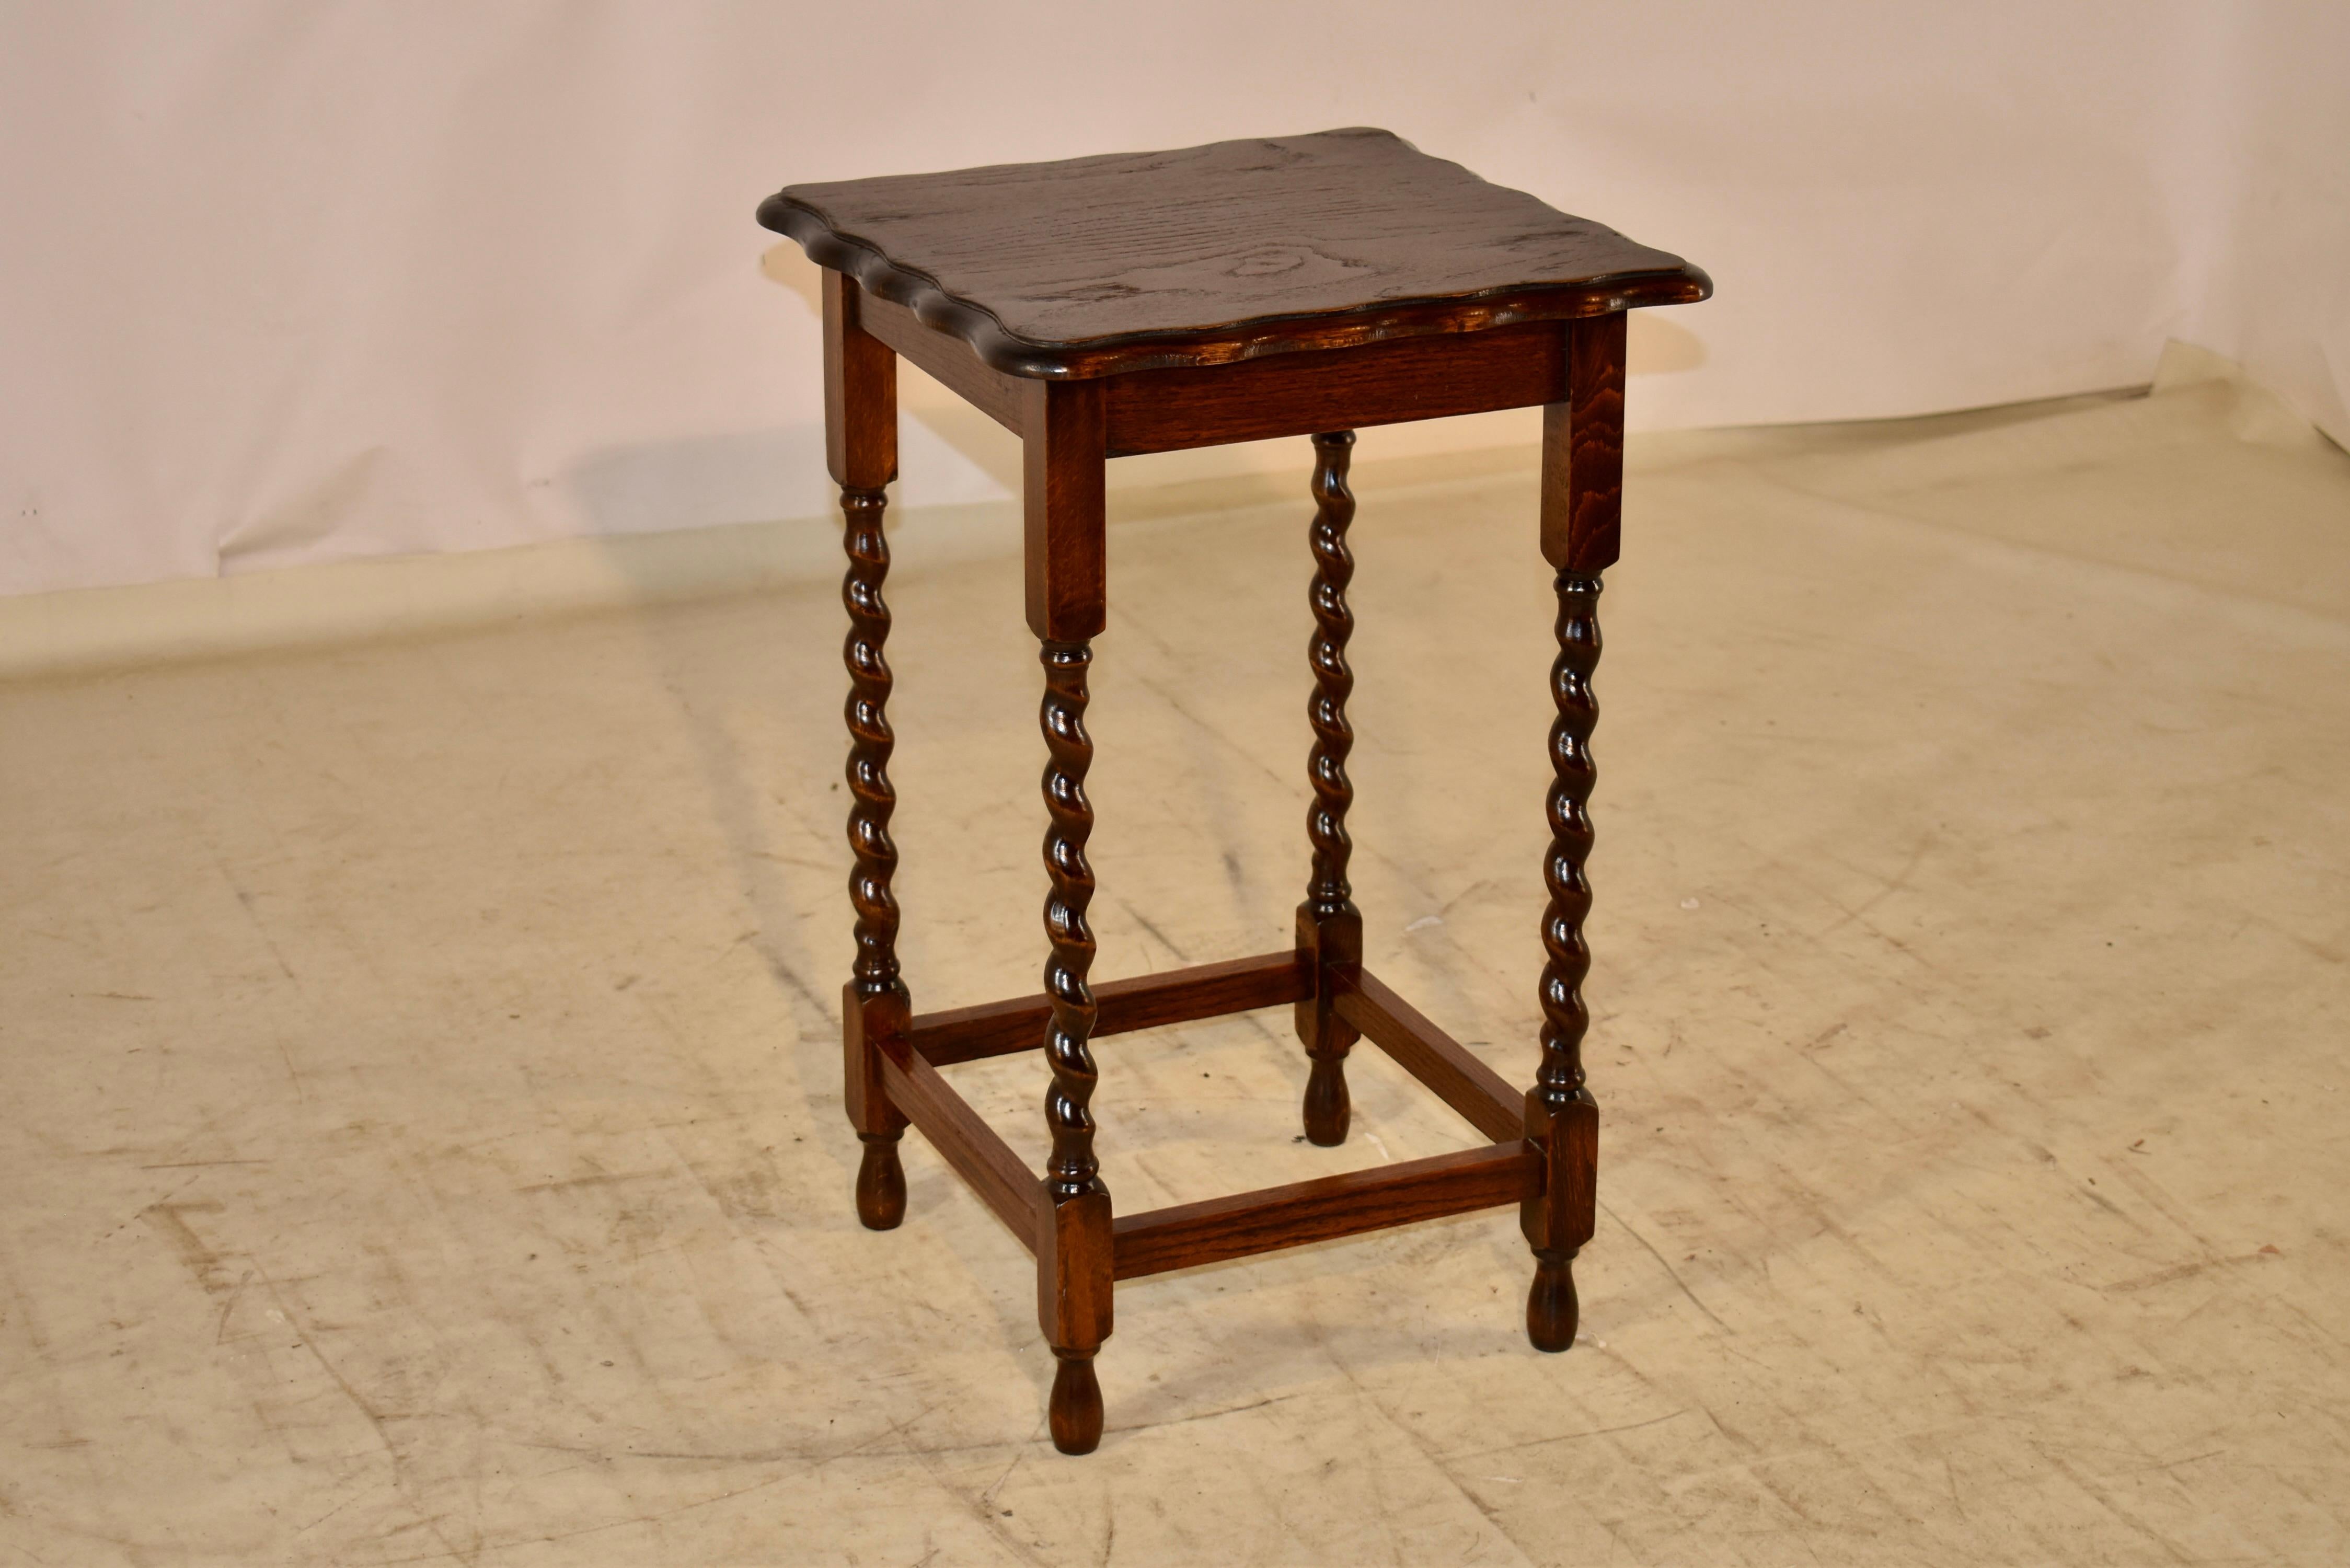 Edwardian oak side table from England with a scalloped and beveled edge around the top, which has fine figured wood. The apron is simple, and the table is supported on hand turned barley twist legs, joined by simple stretchers and raised on hand